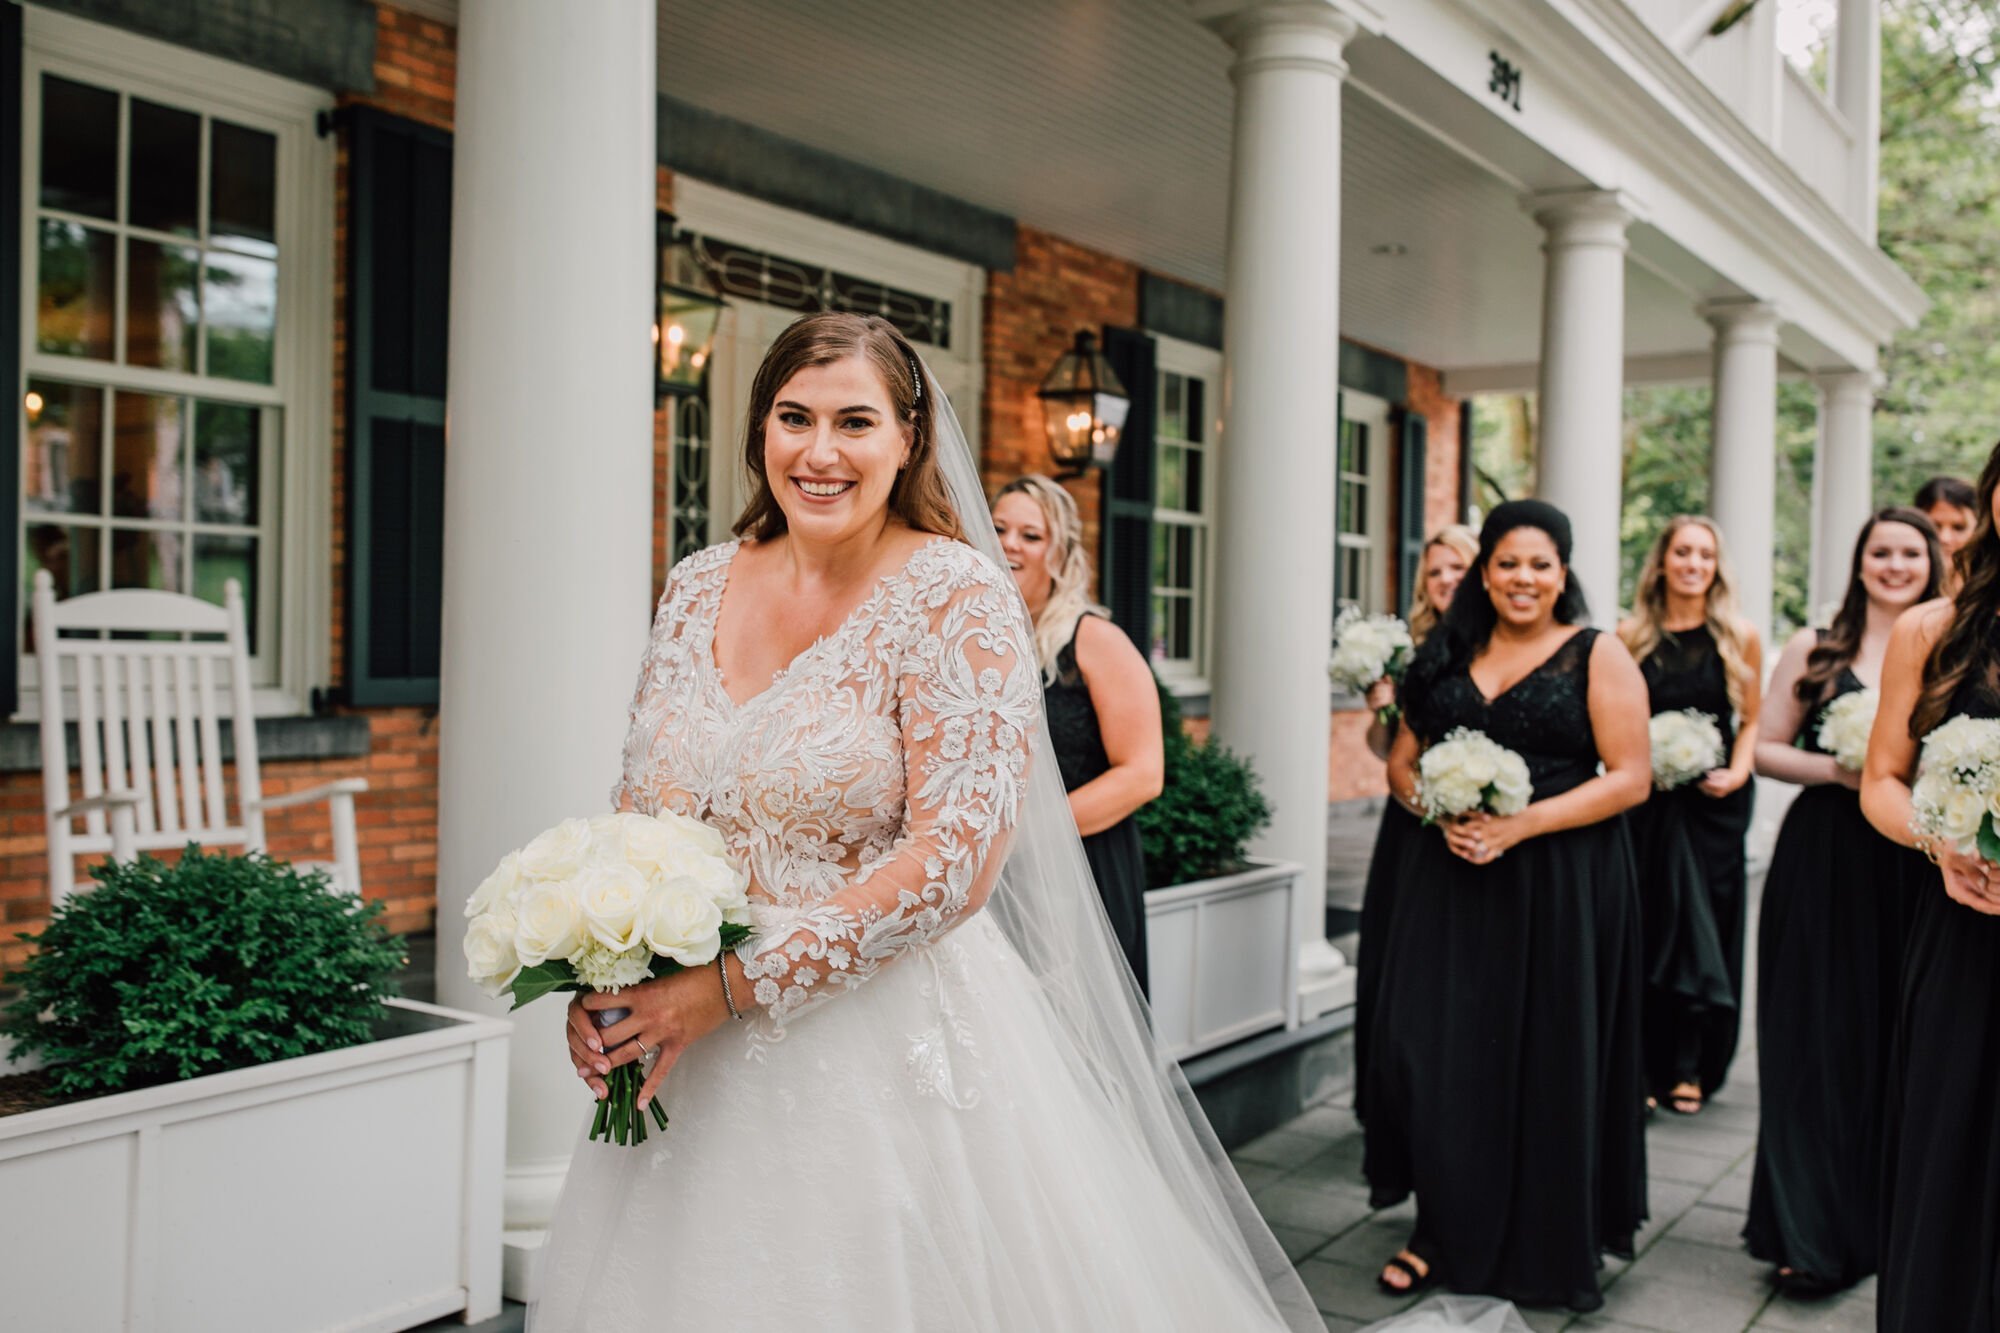  finger lakes wedding photographer captures a bride smiling on her way to the church with her bridesmaids&nbsp; 